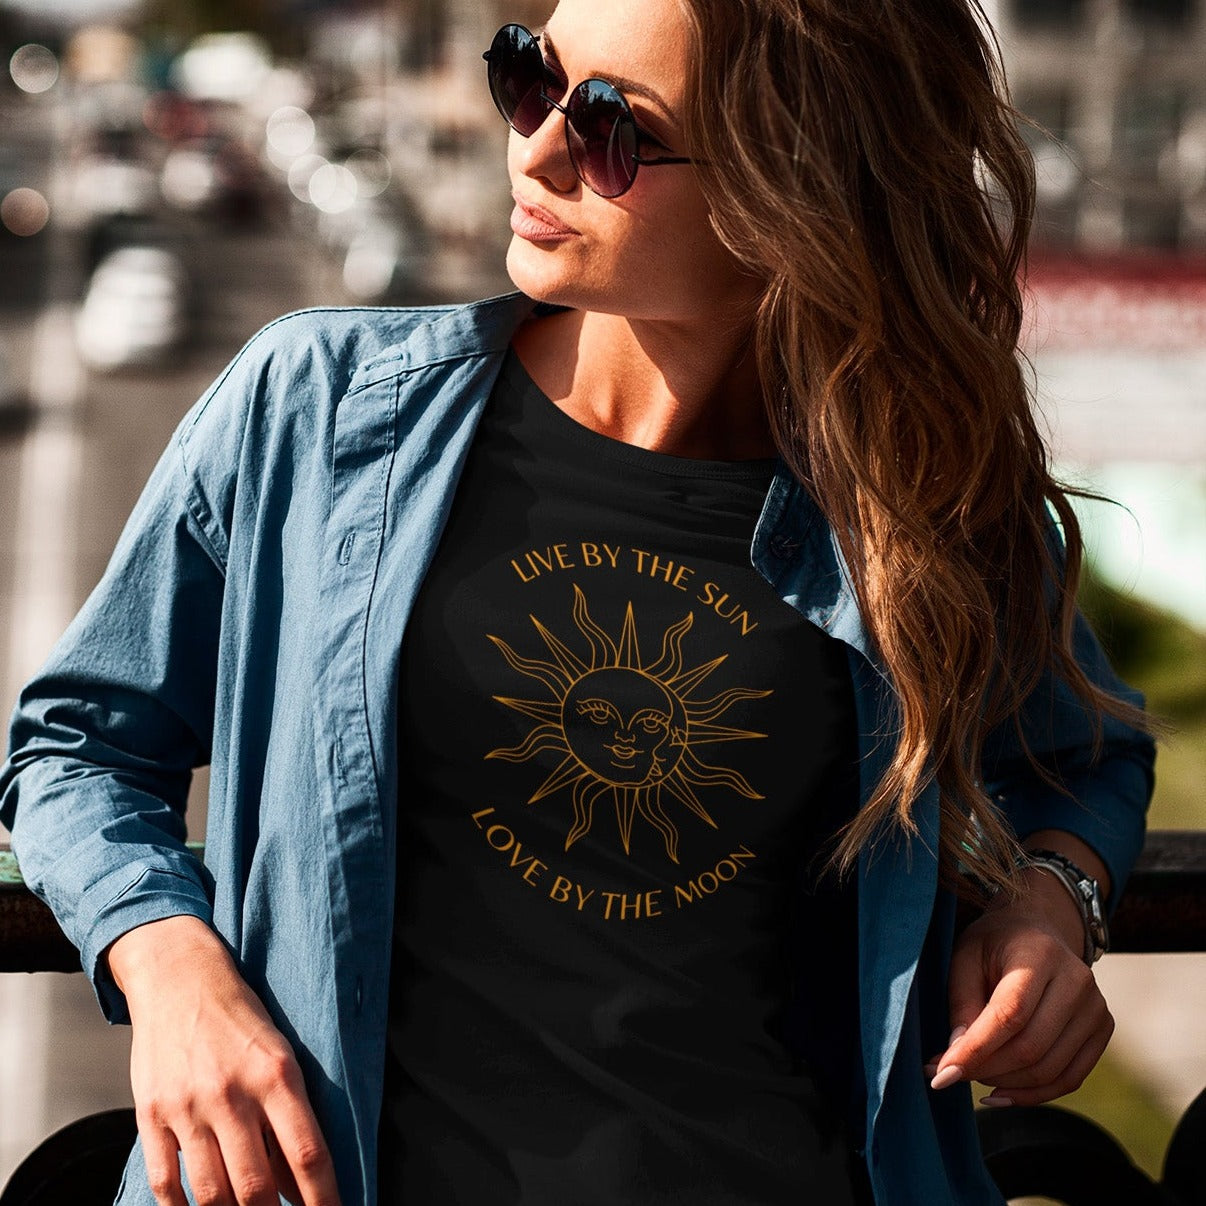 live-by-the-sun-love-by-the-moon-black-t-shirt-with-sun-and-moon-design-mockup-of-a-woman-with-long-hair-wearing-a-crewneck-tee-outside